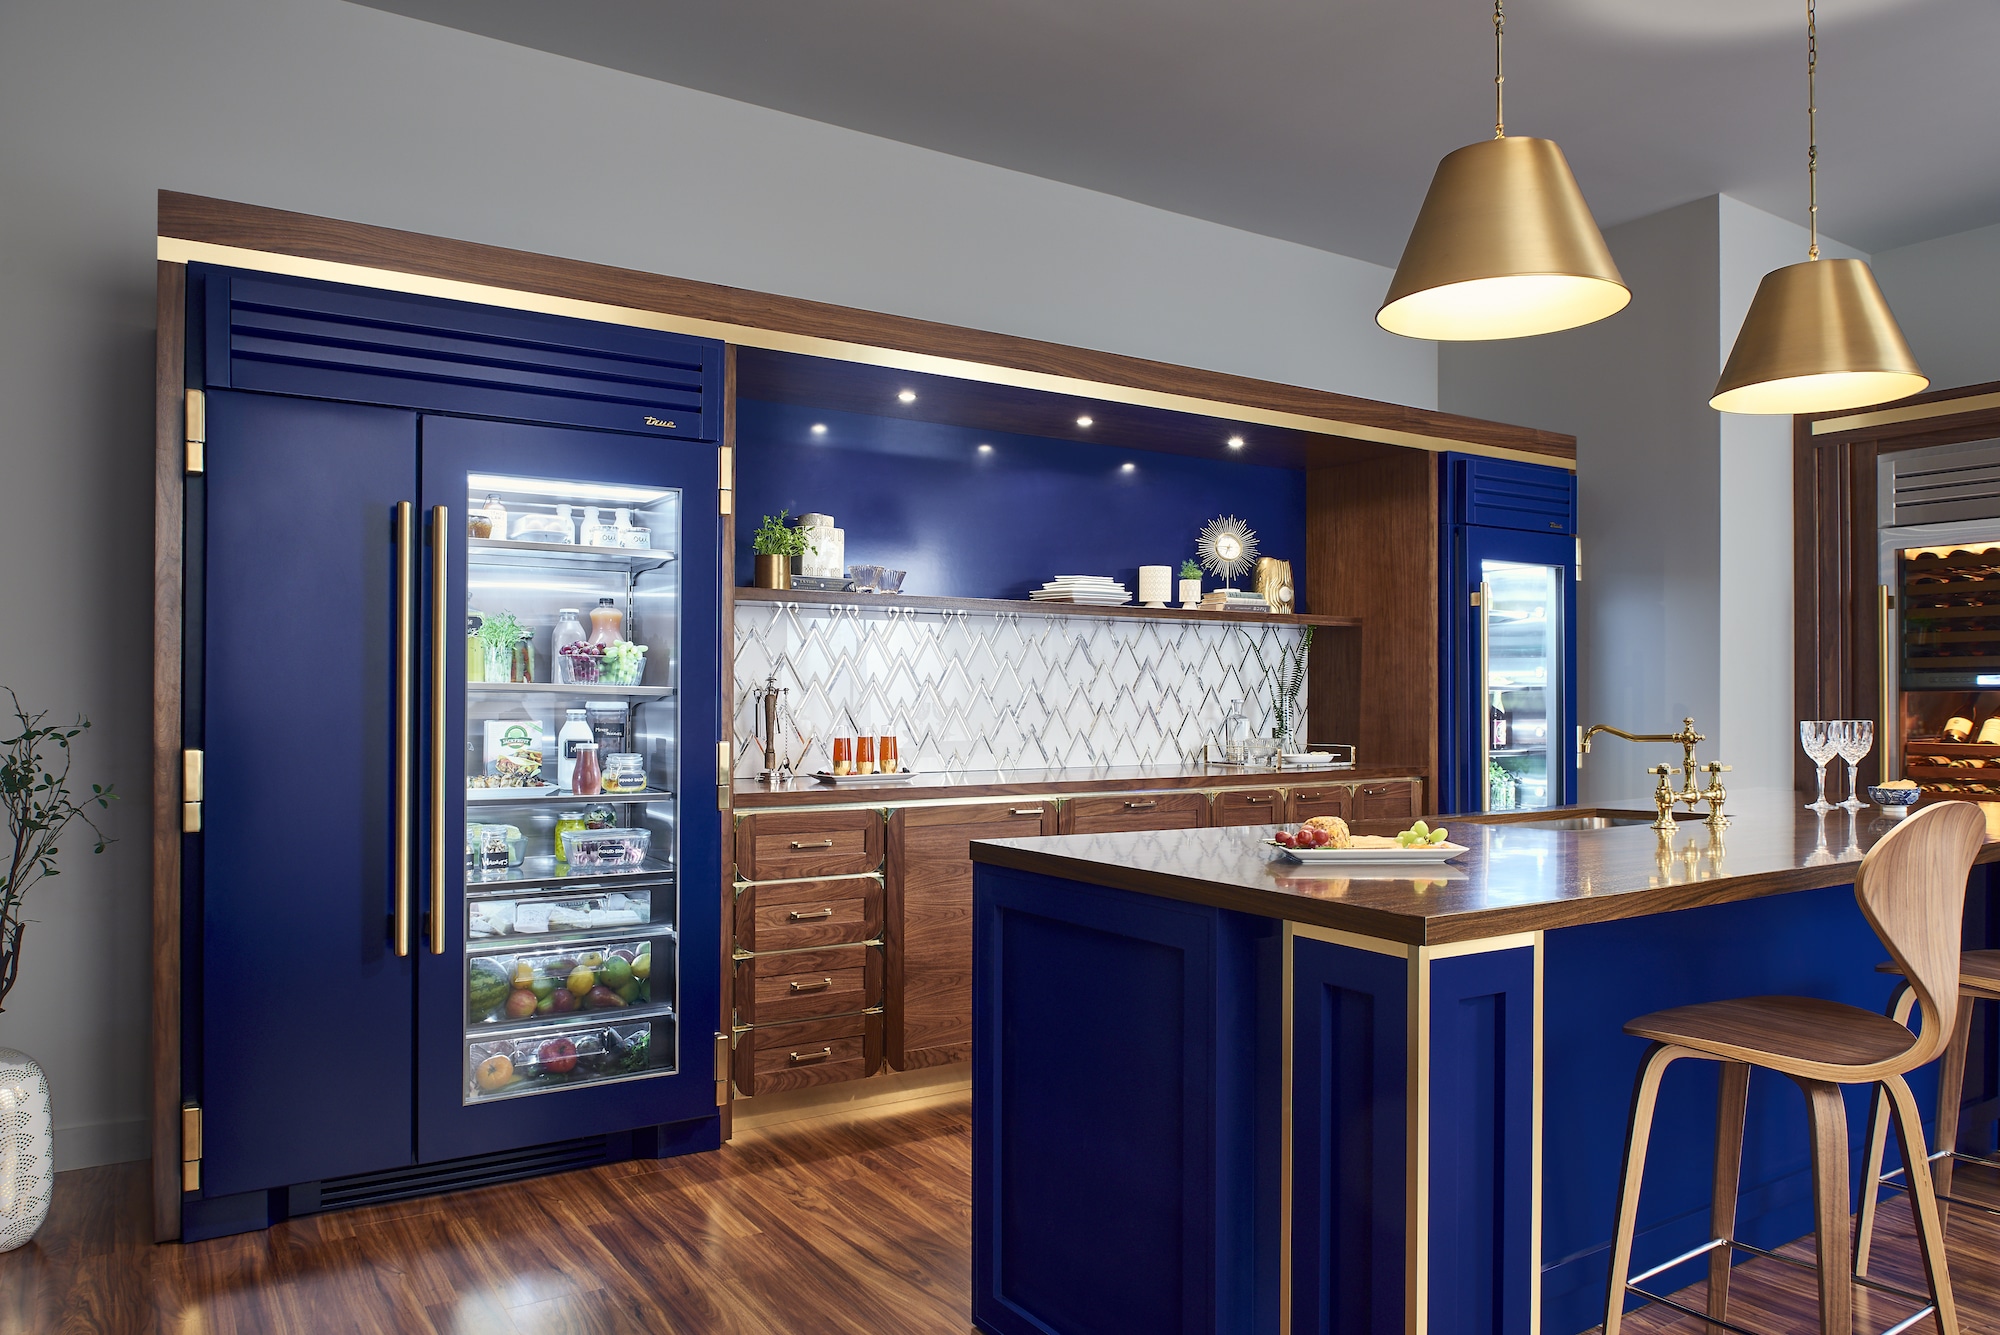 Blue kitchens – 27 navy, cobalt, periwinkle and teal ideas